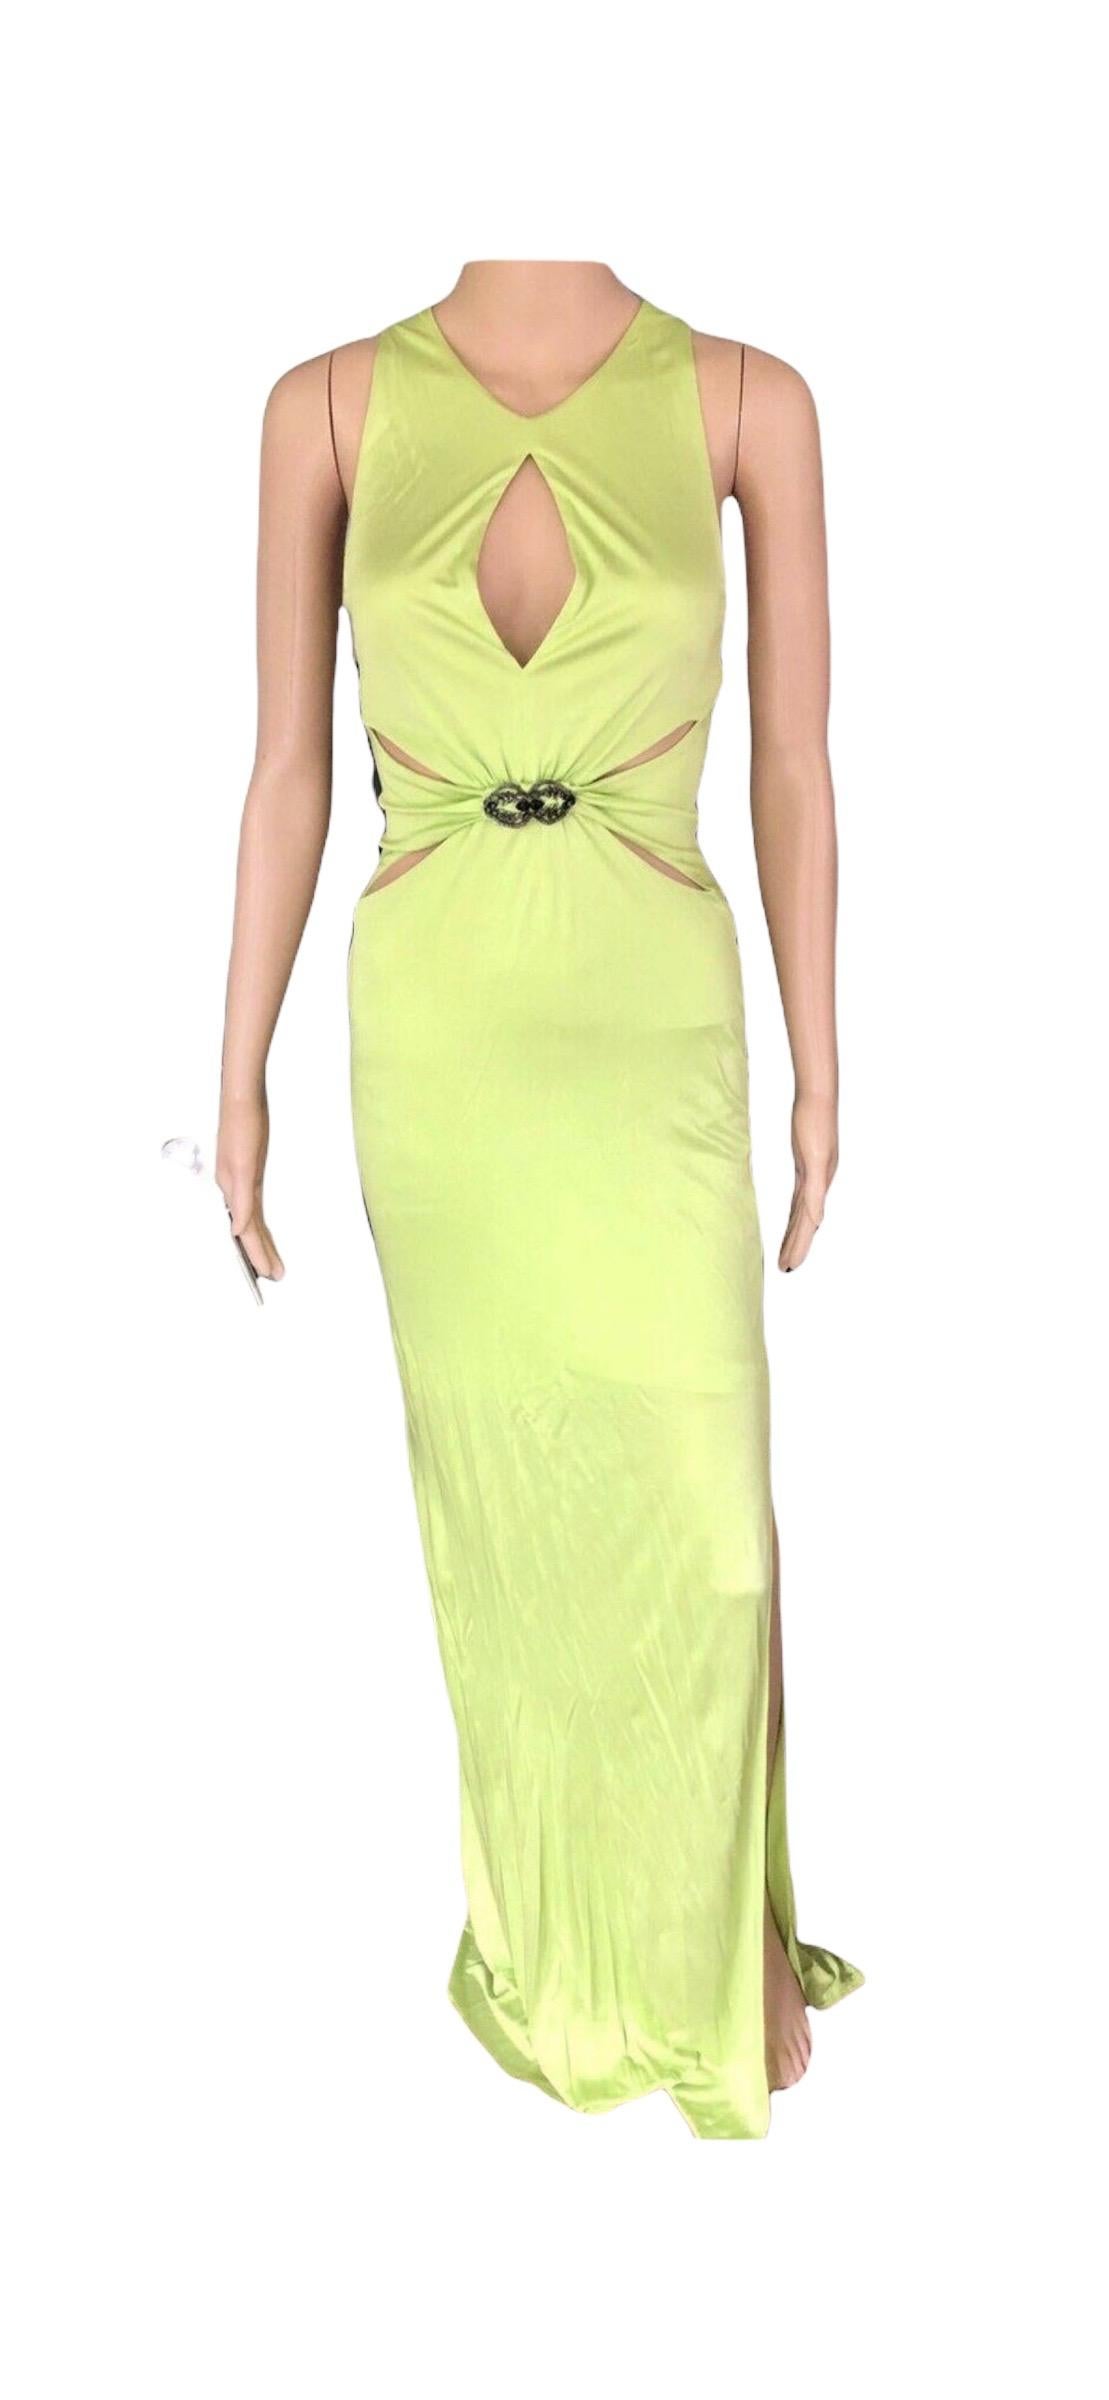 Roberto Cavalli Embellished Plunged Cutout Evening Dress Gown In Good Condition For Sale In Naples, FL